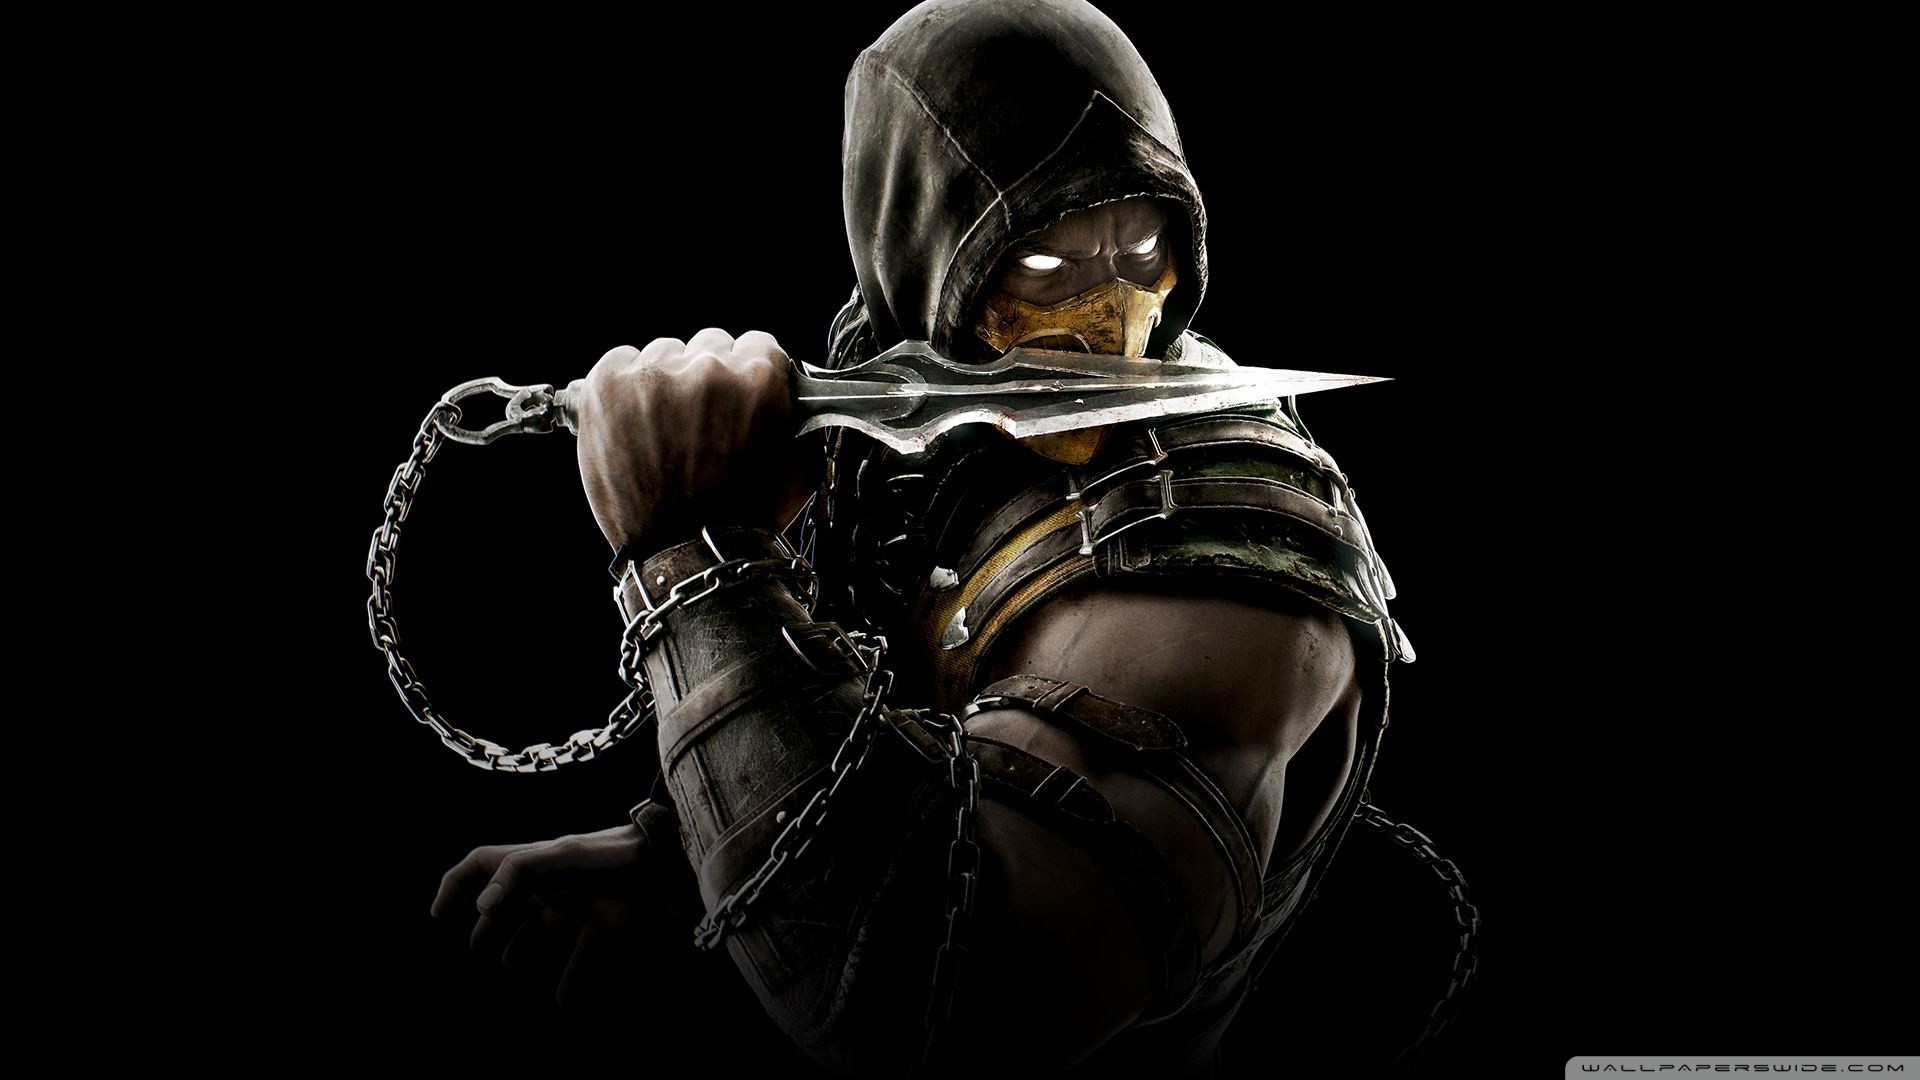 Mortal Kombat Hd Wallpapers For Android Mobile Full Screen